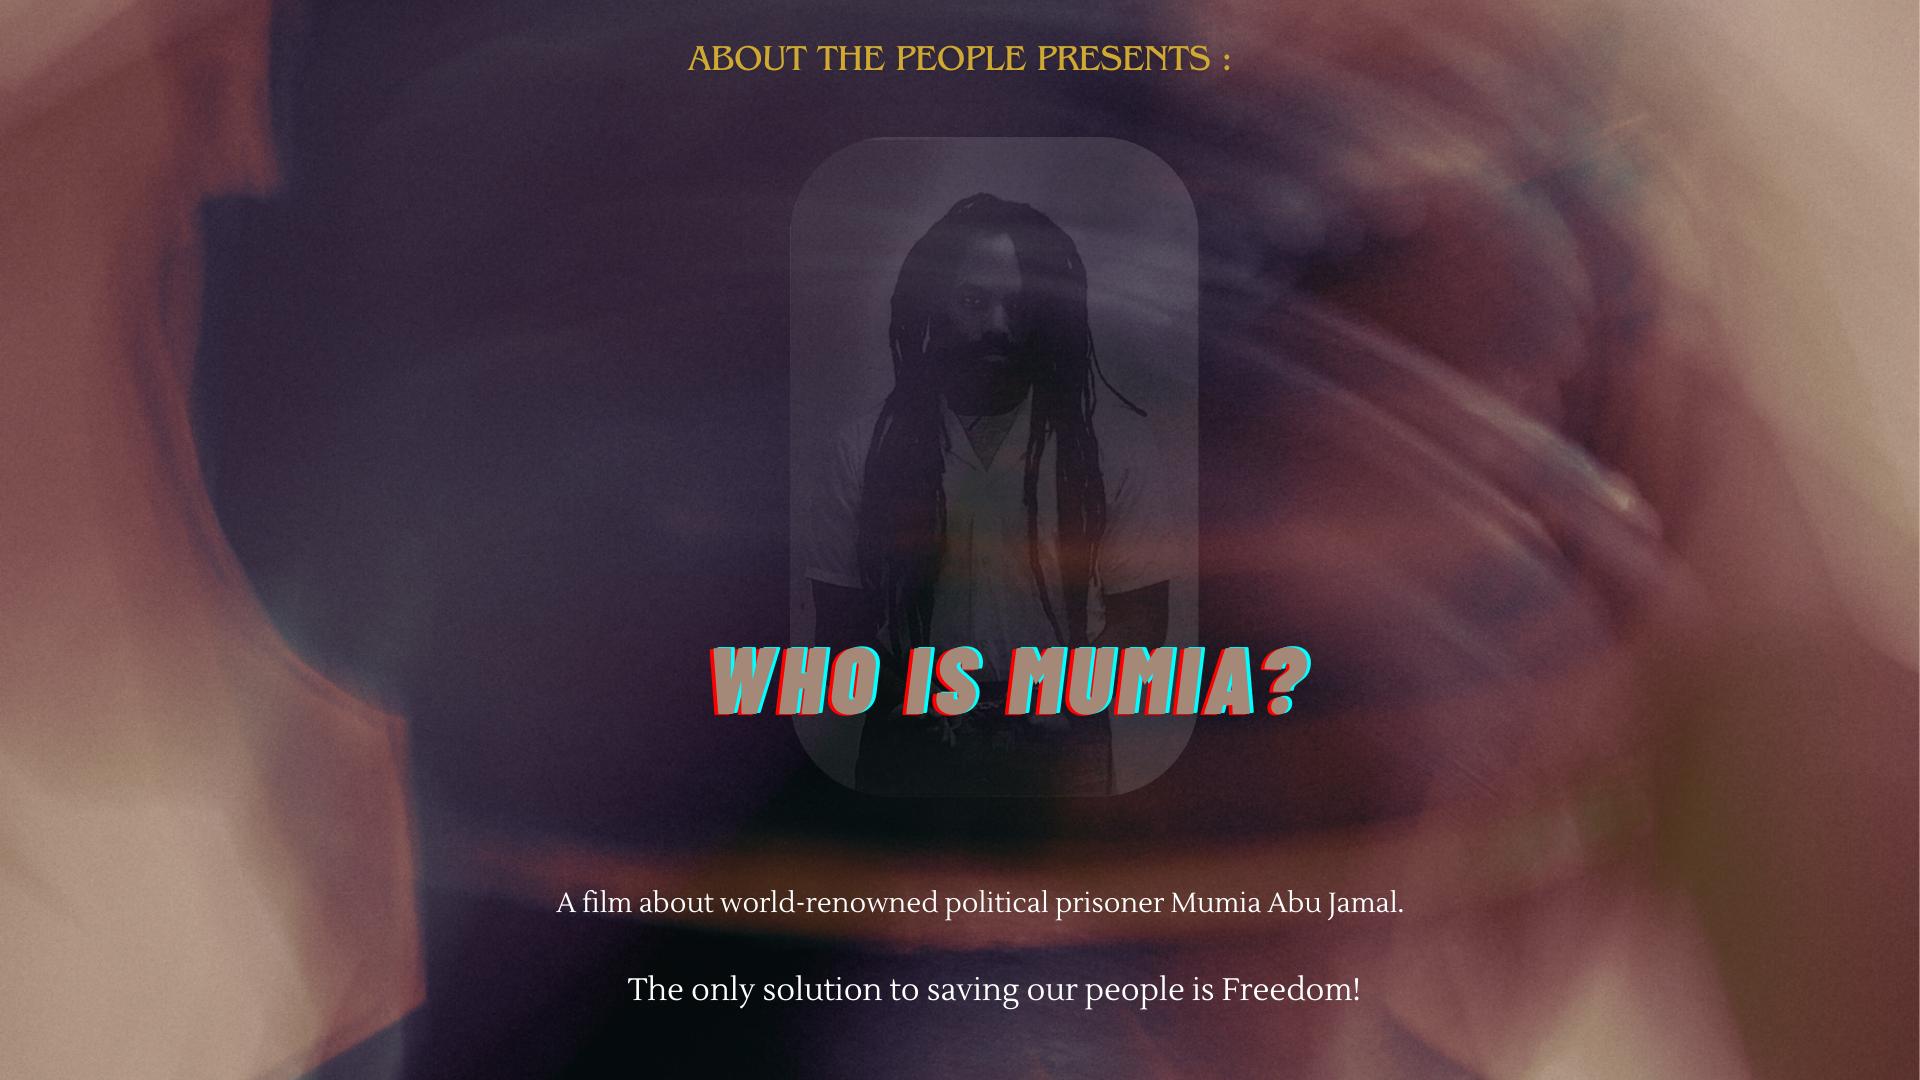 About The People Presents: Who Is Mumia?